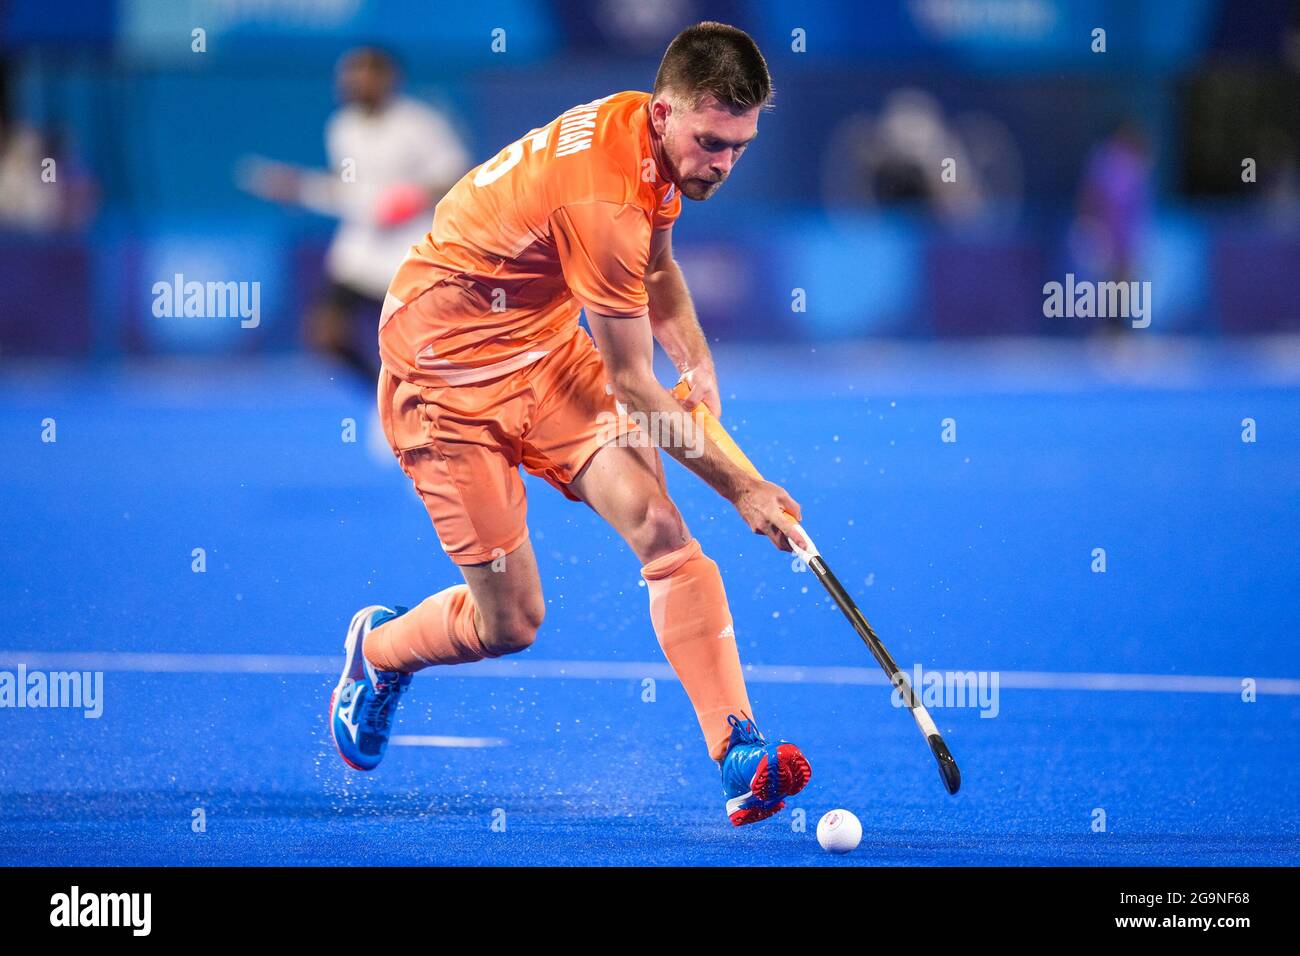 TOKYO, JAPAN - JULY 27: Thierry Brinkman of the Netherlands competing on Men's Pool B during the Tokyo 2020 Olympic Games at the Oi Hockey Stadium on July 27, 2021 in Tokyo, Japan (Photo by Yannick Verhoeven/Orange Pictures) NOCNSF Stock Photo